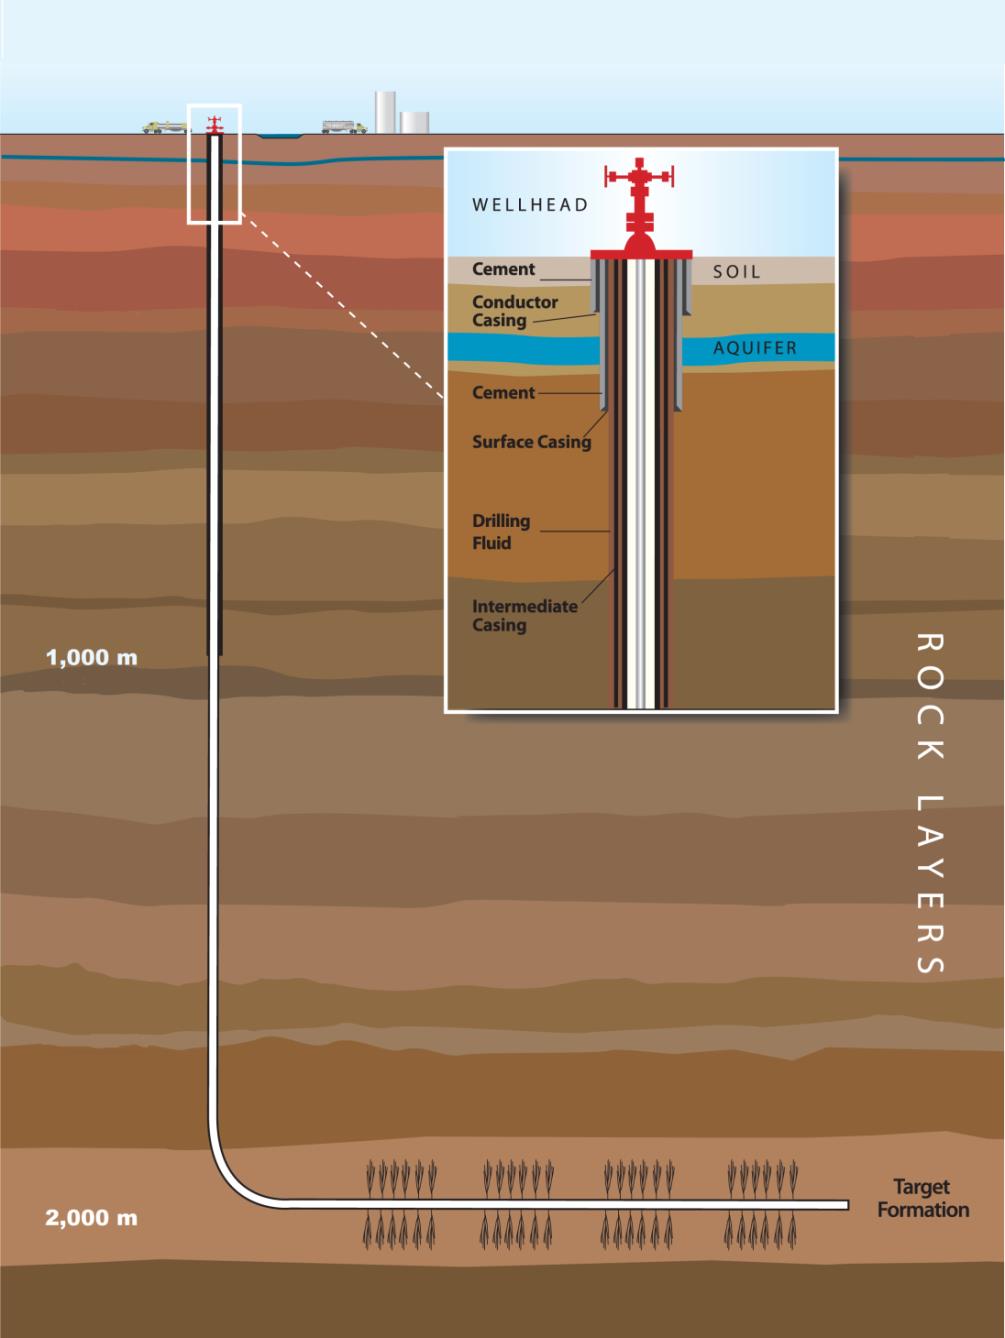 Schematic diagram showing typical well construction, casing, and horizontal drilling